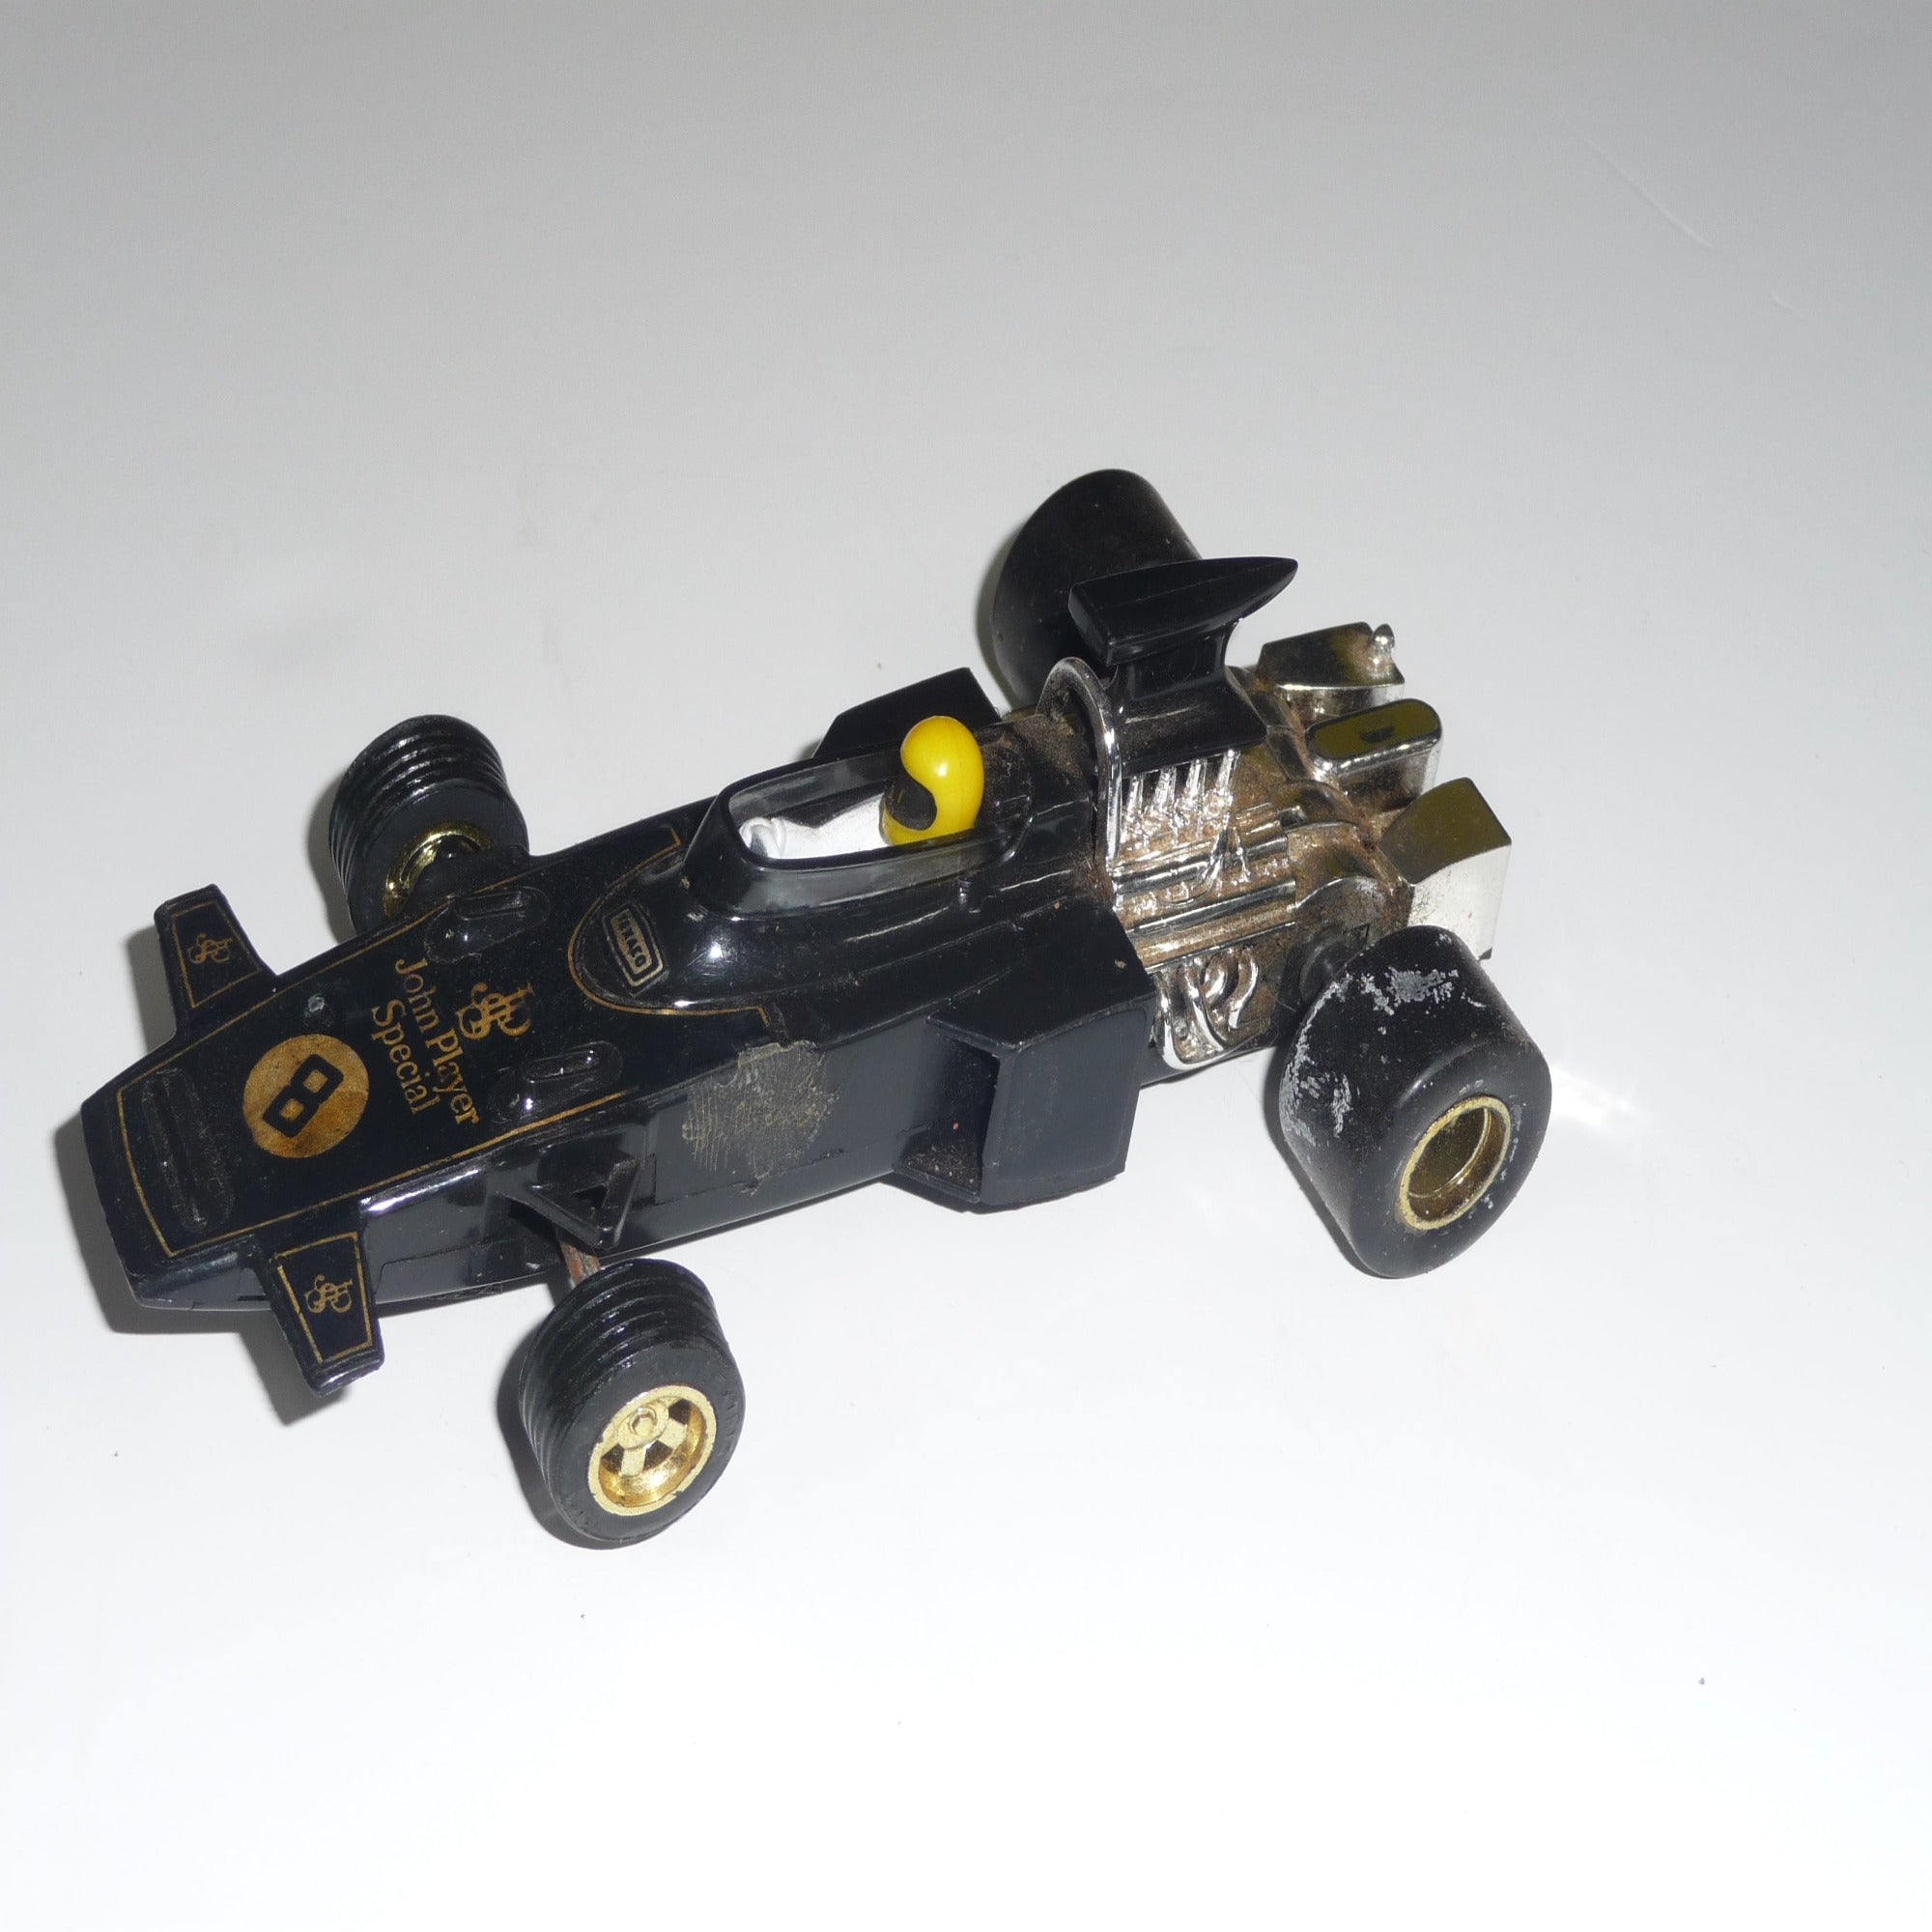 Used Scalextric Lotus JPS F1 C050  Free Postage on Orders over $40